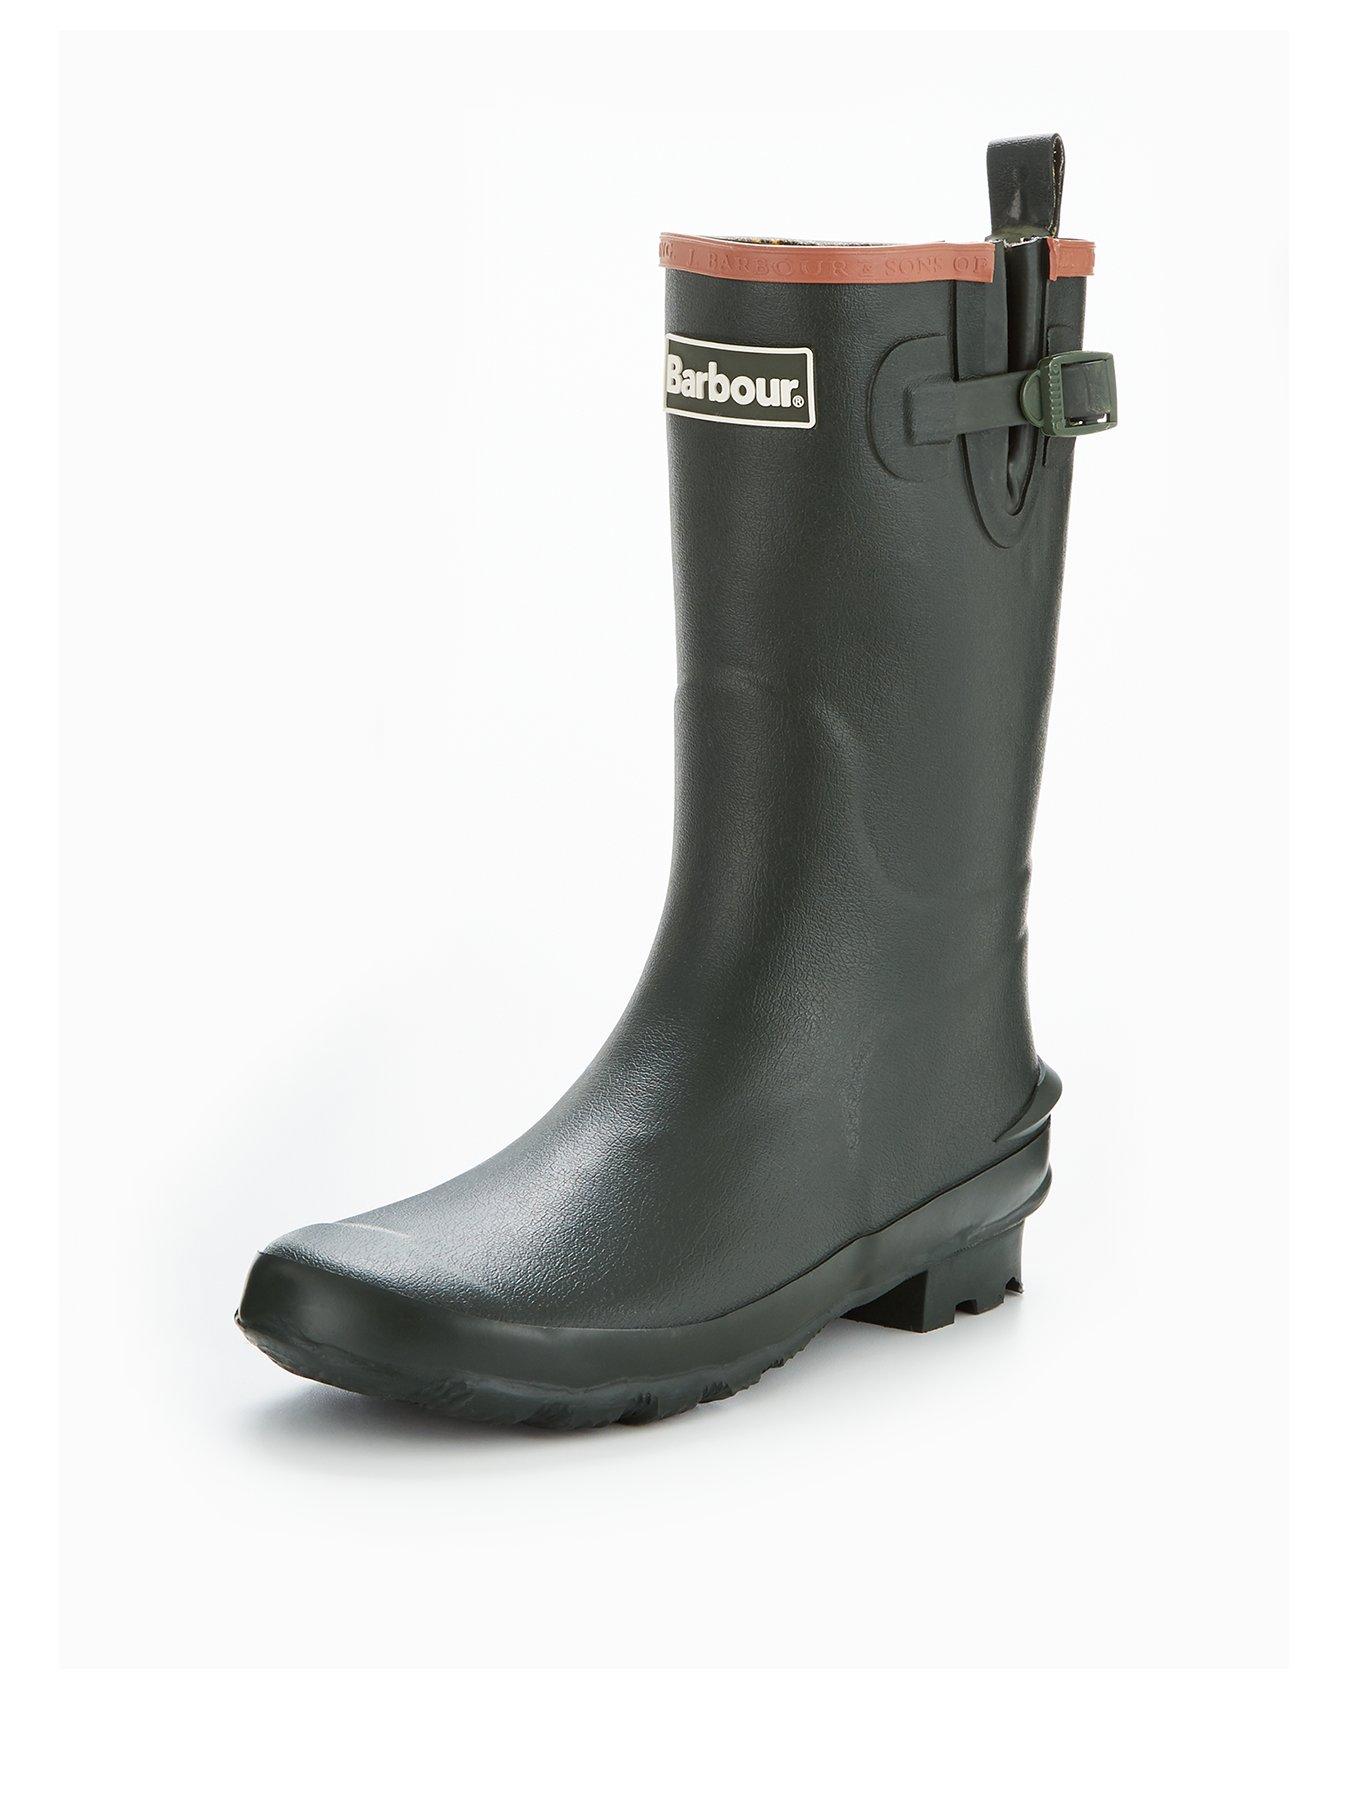 infant barbour wellies